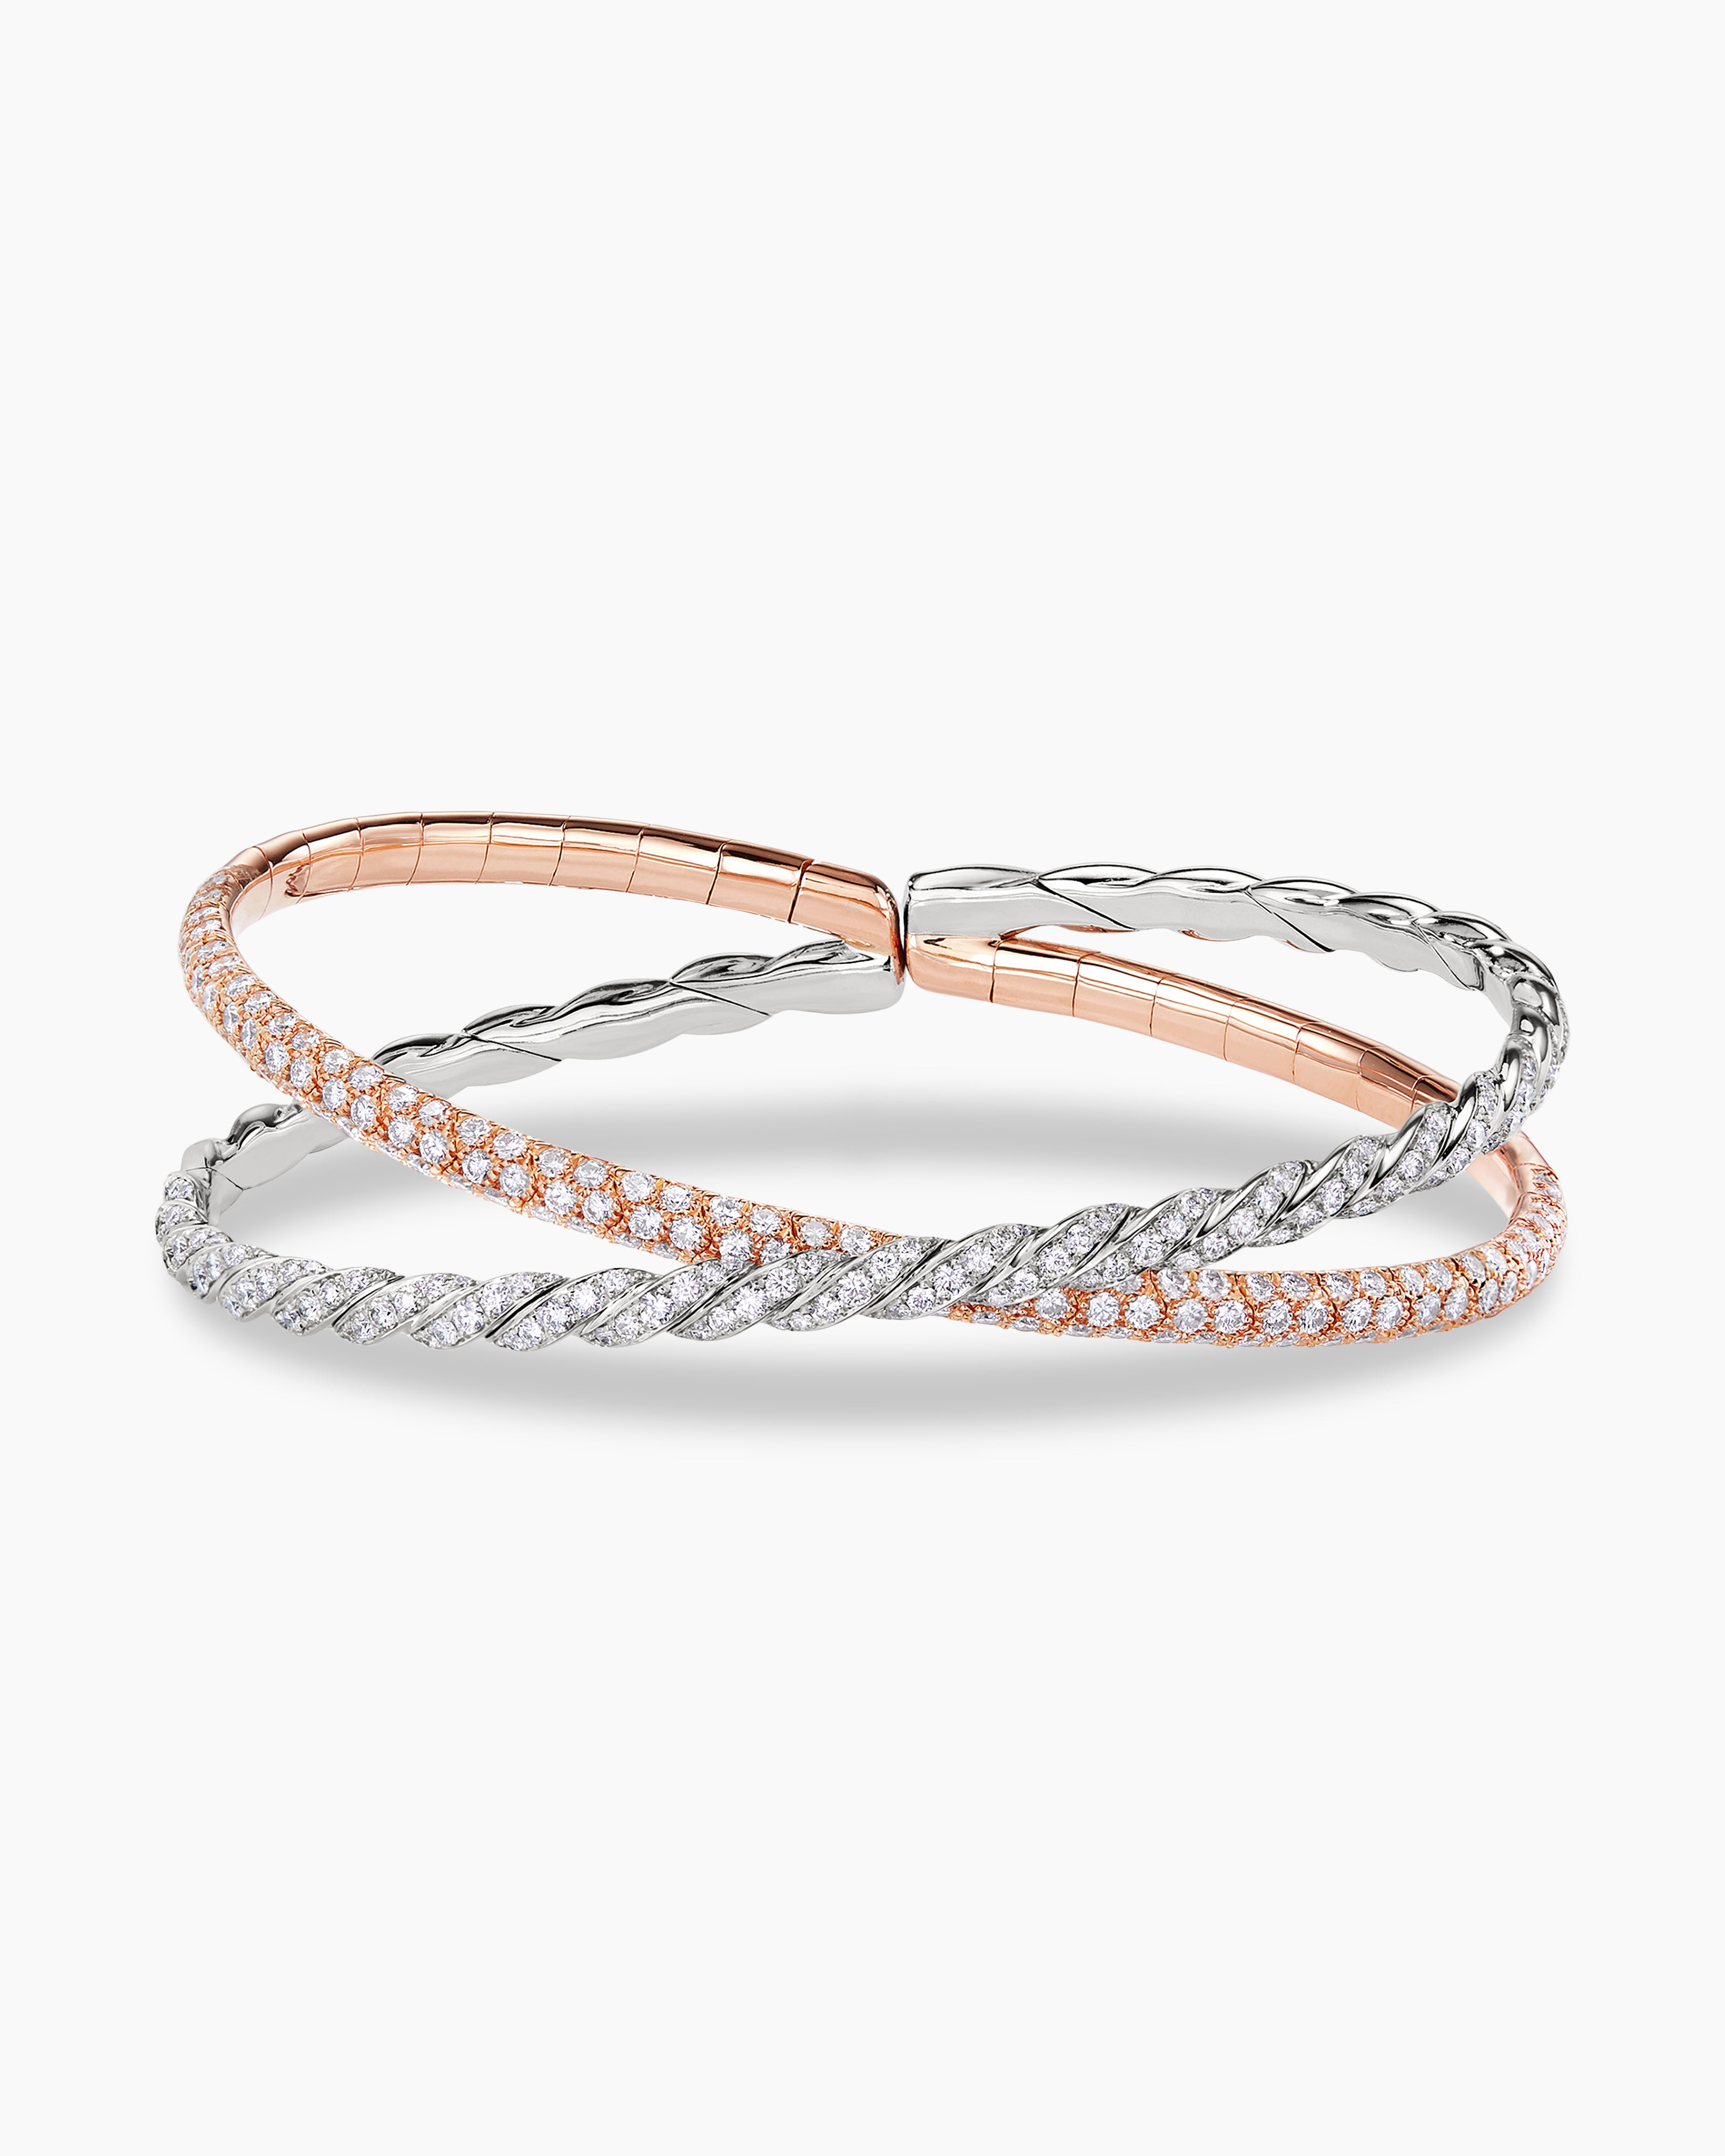 Pavéflex Two Row Bracelet in 18K Rose and White Gold with